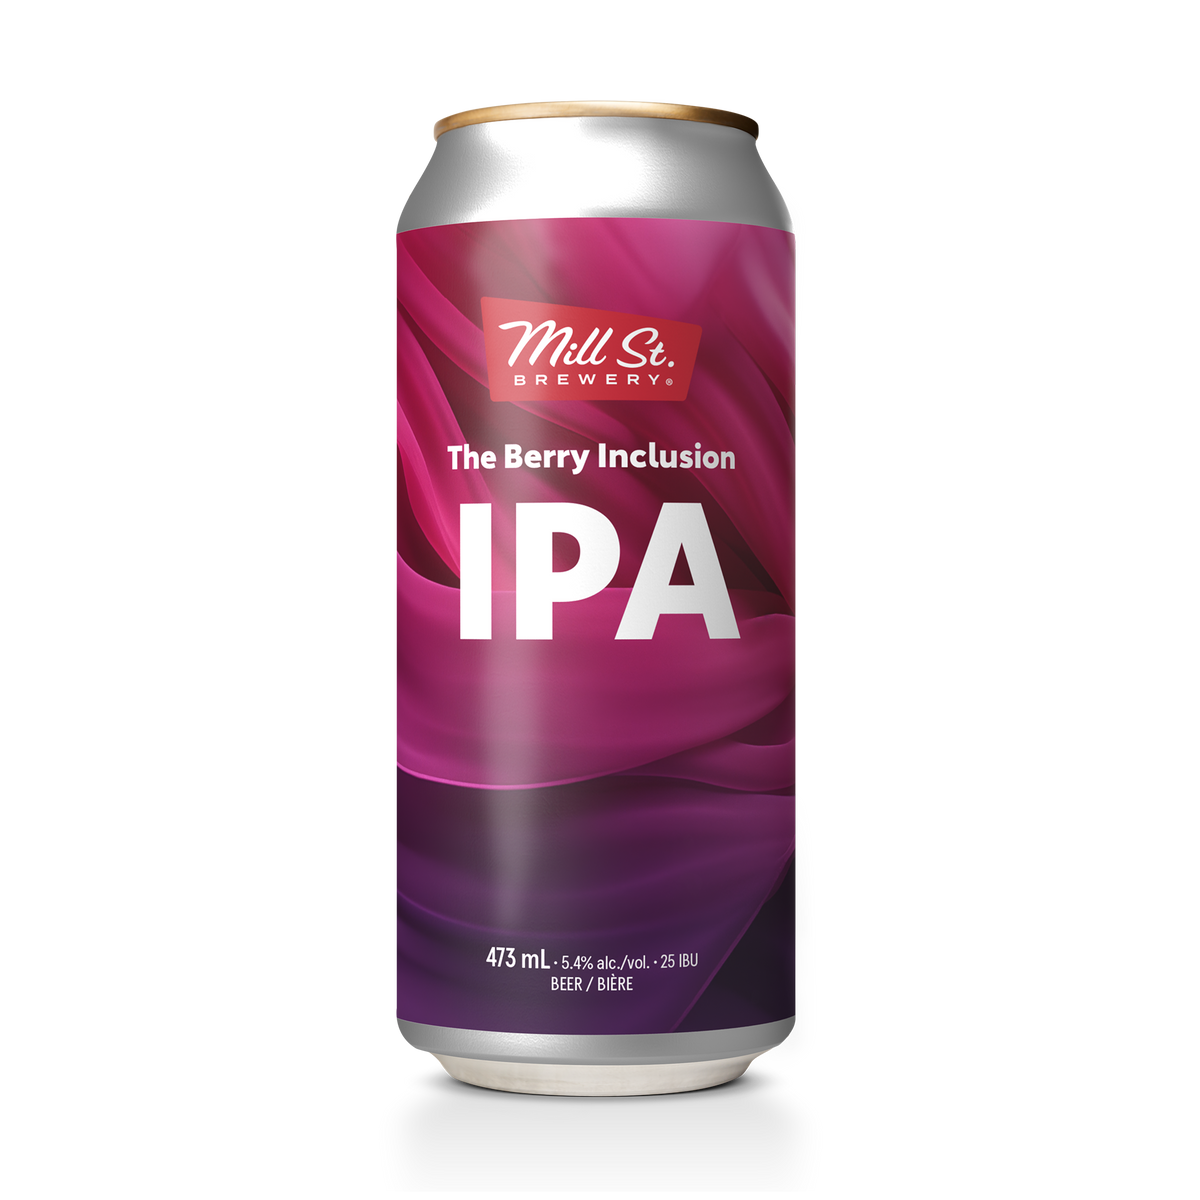 The Berry Inclusion IPA